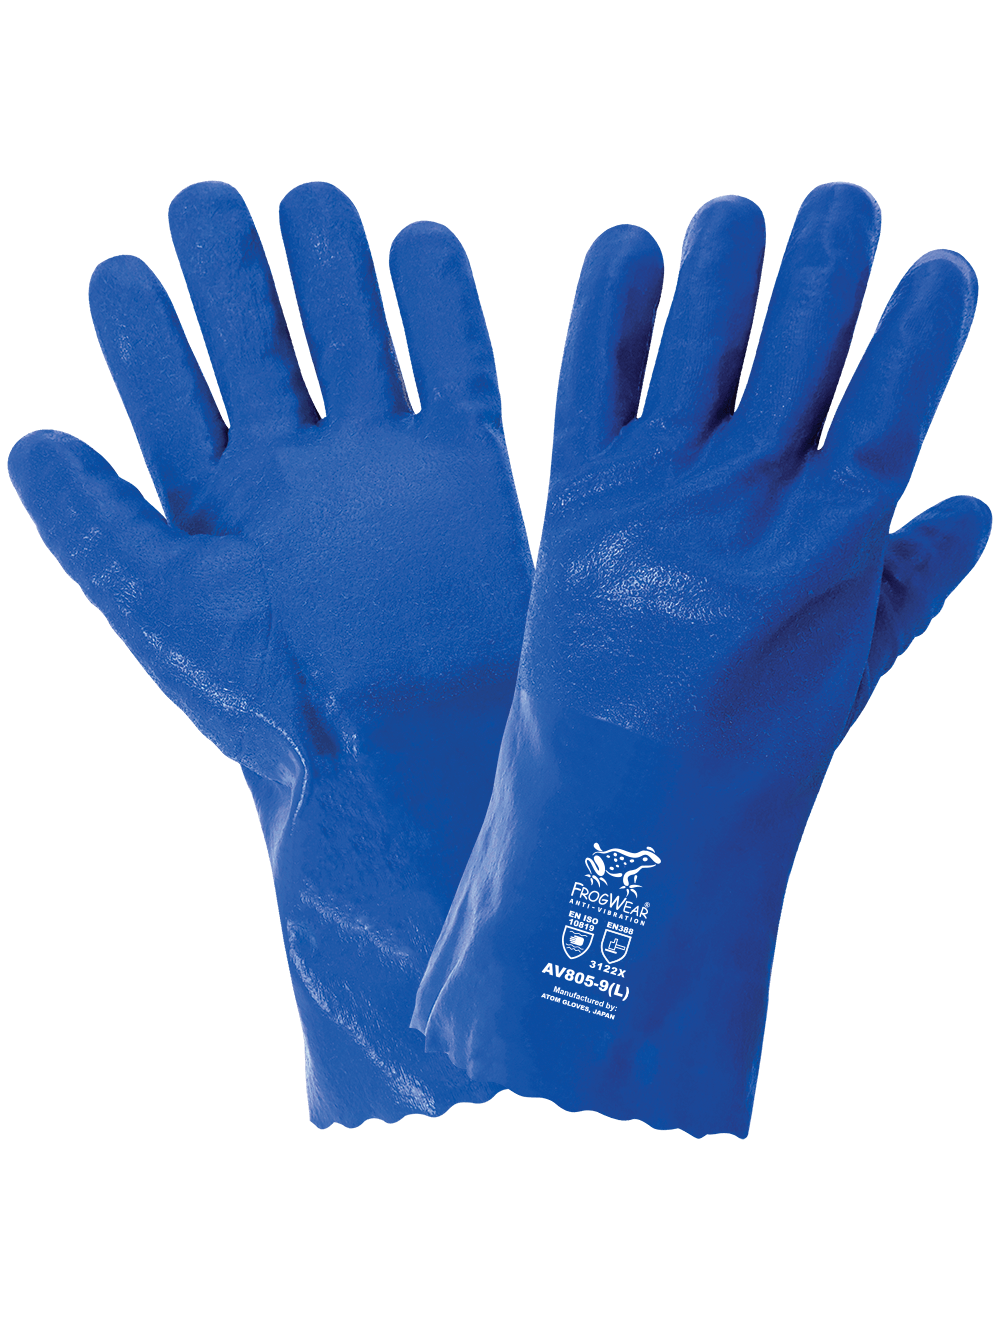 Fully Coated Light-weight Nitrile Gloves : Non-insulated Chemical